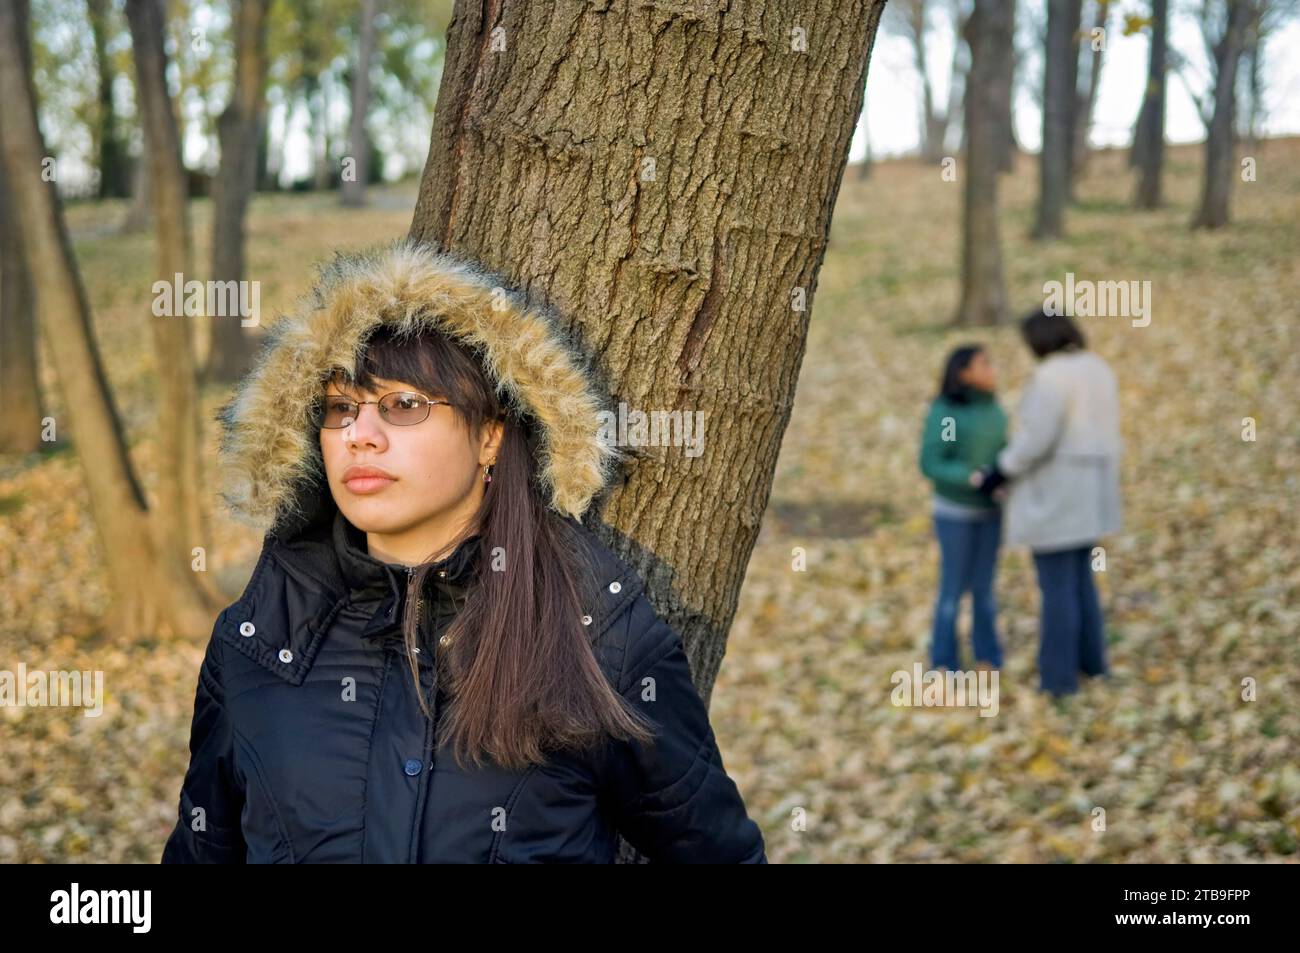 Teenage girl leans against a tree in a city park in autumn, with her mother and sister in the background Stock Photo